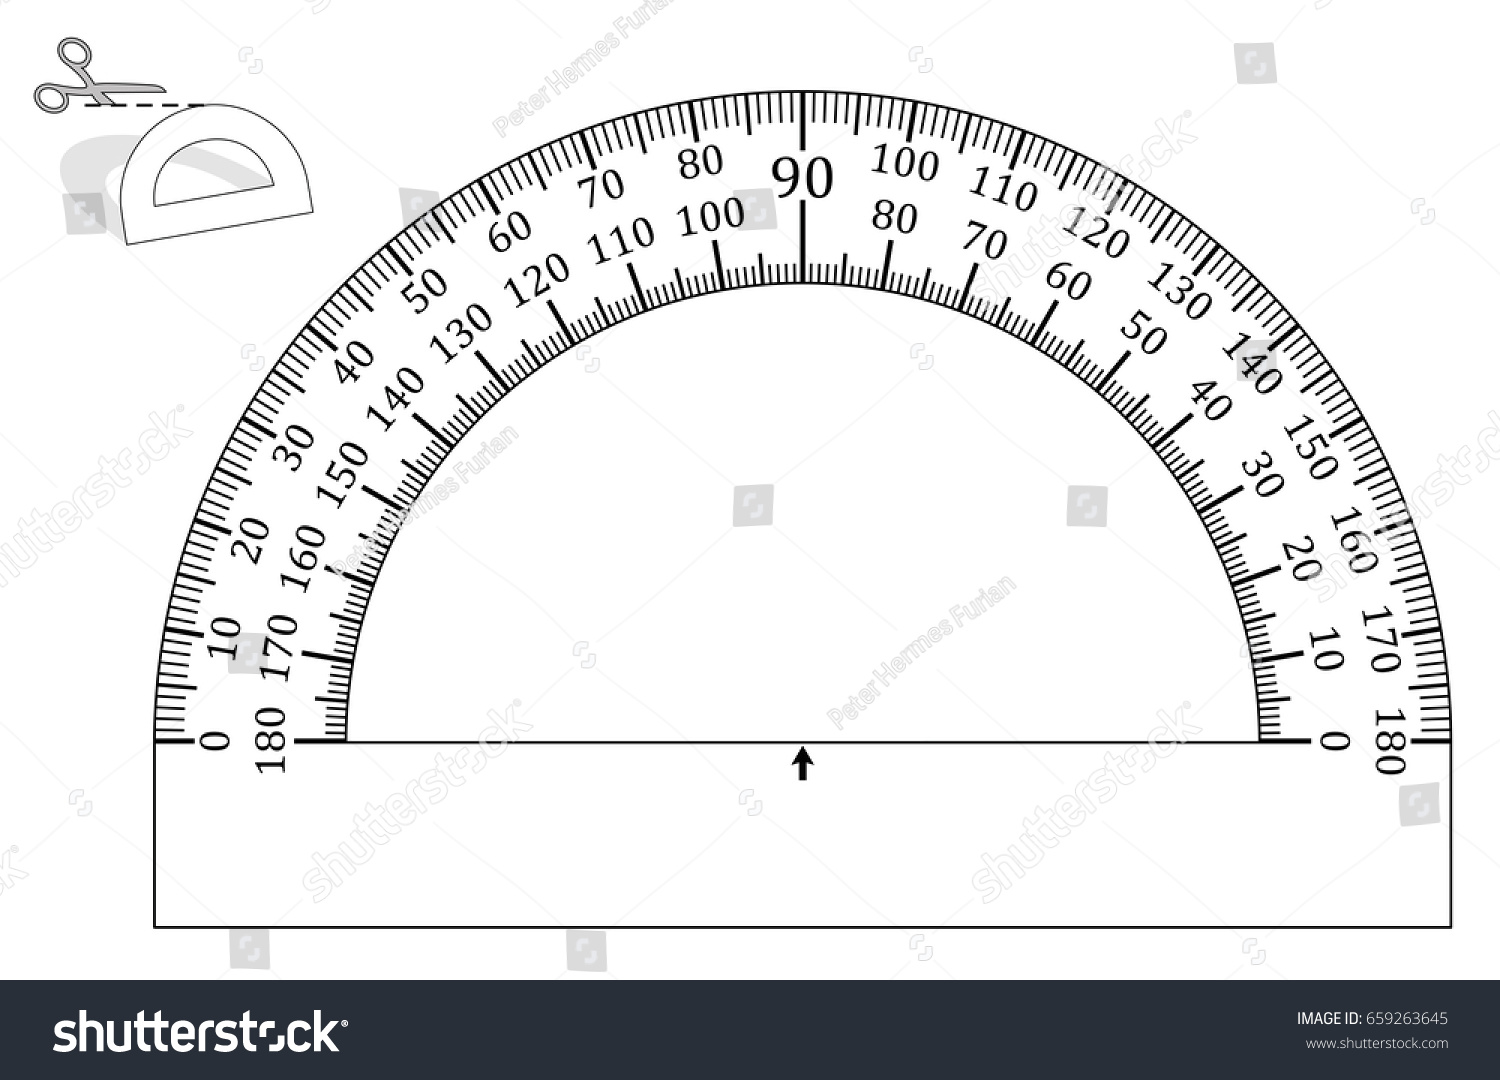 protractor paper model cut out print stock vector royalty free 659263645 shutterstock